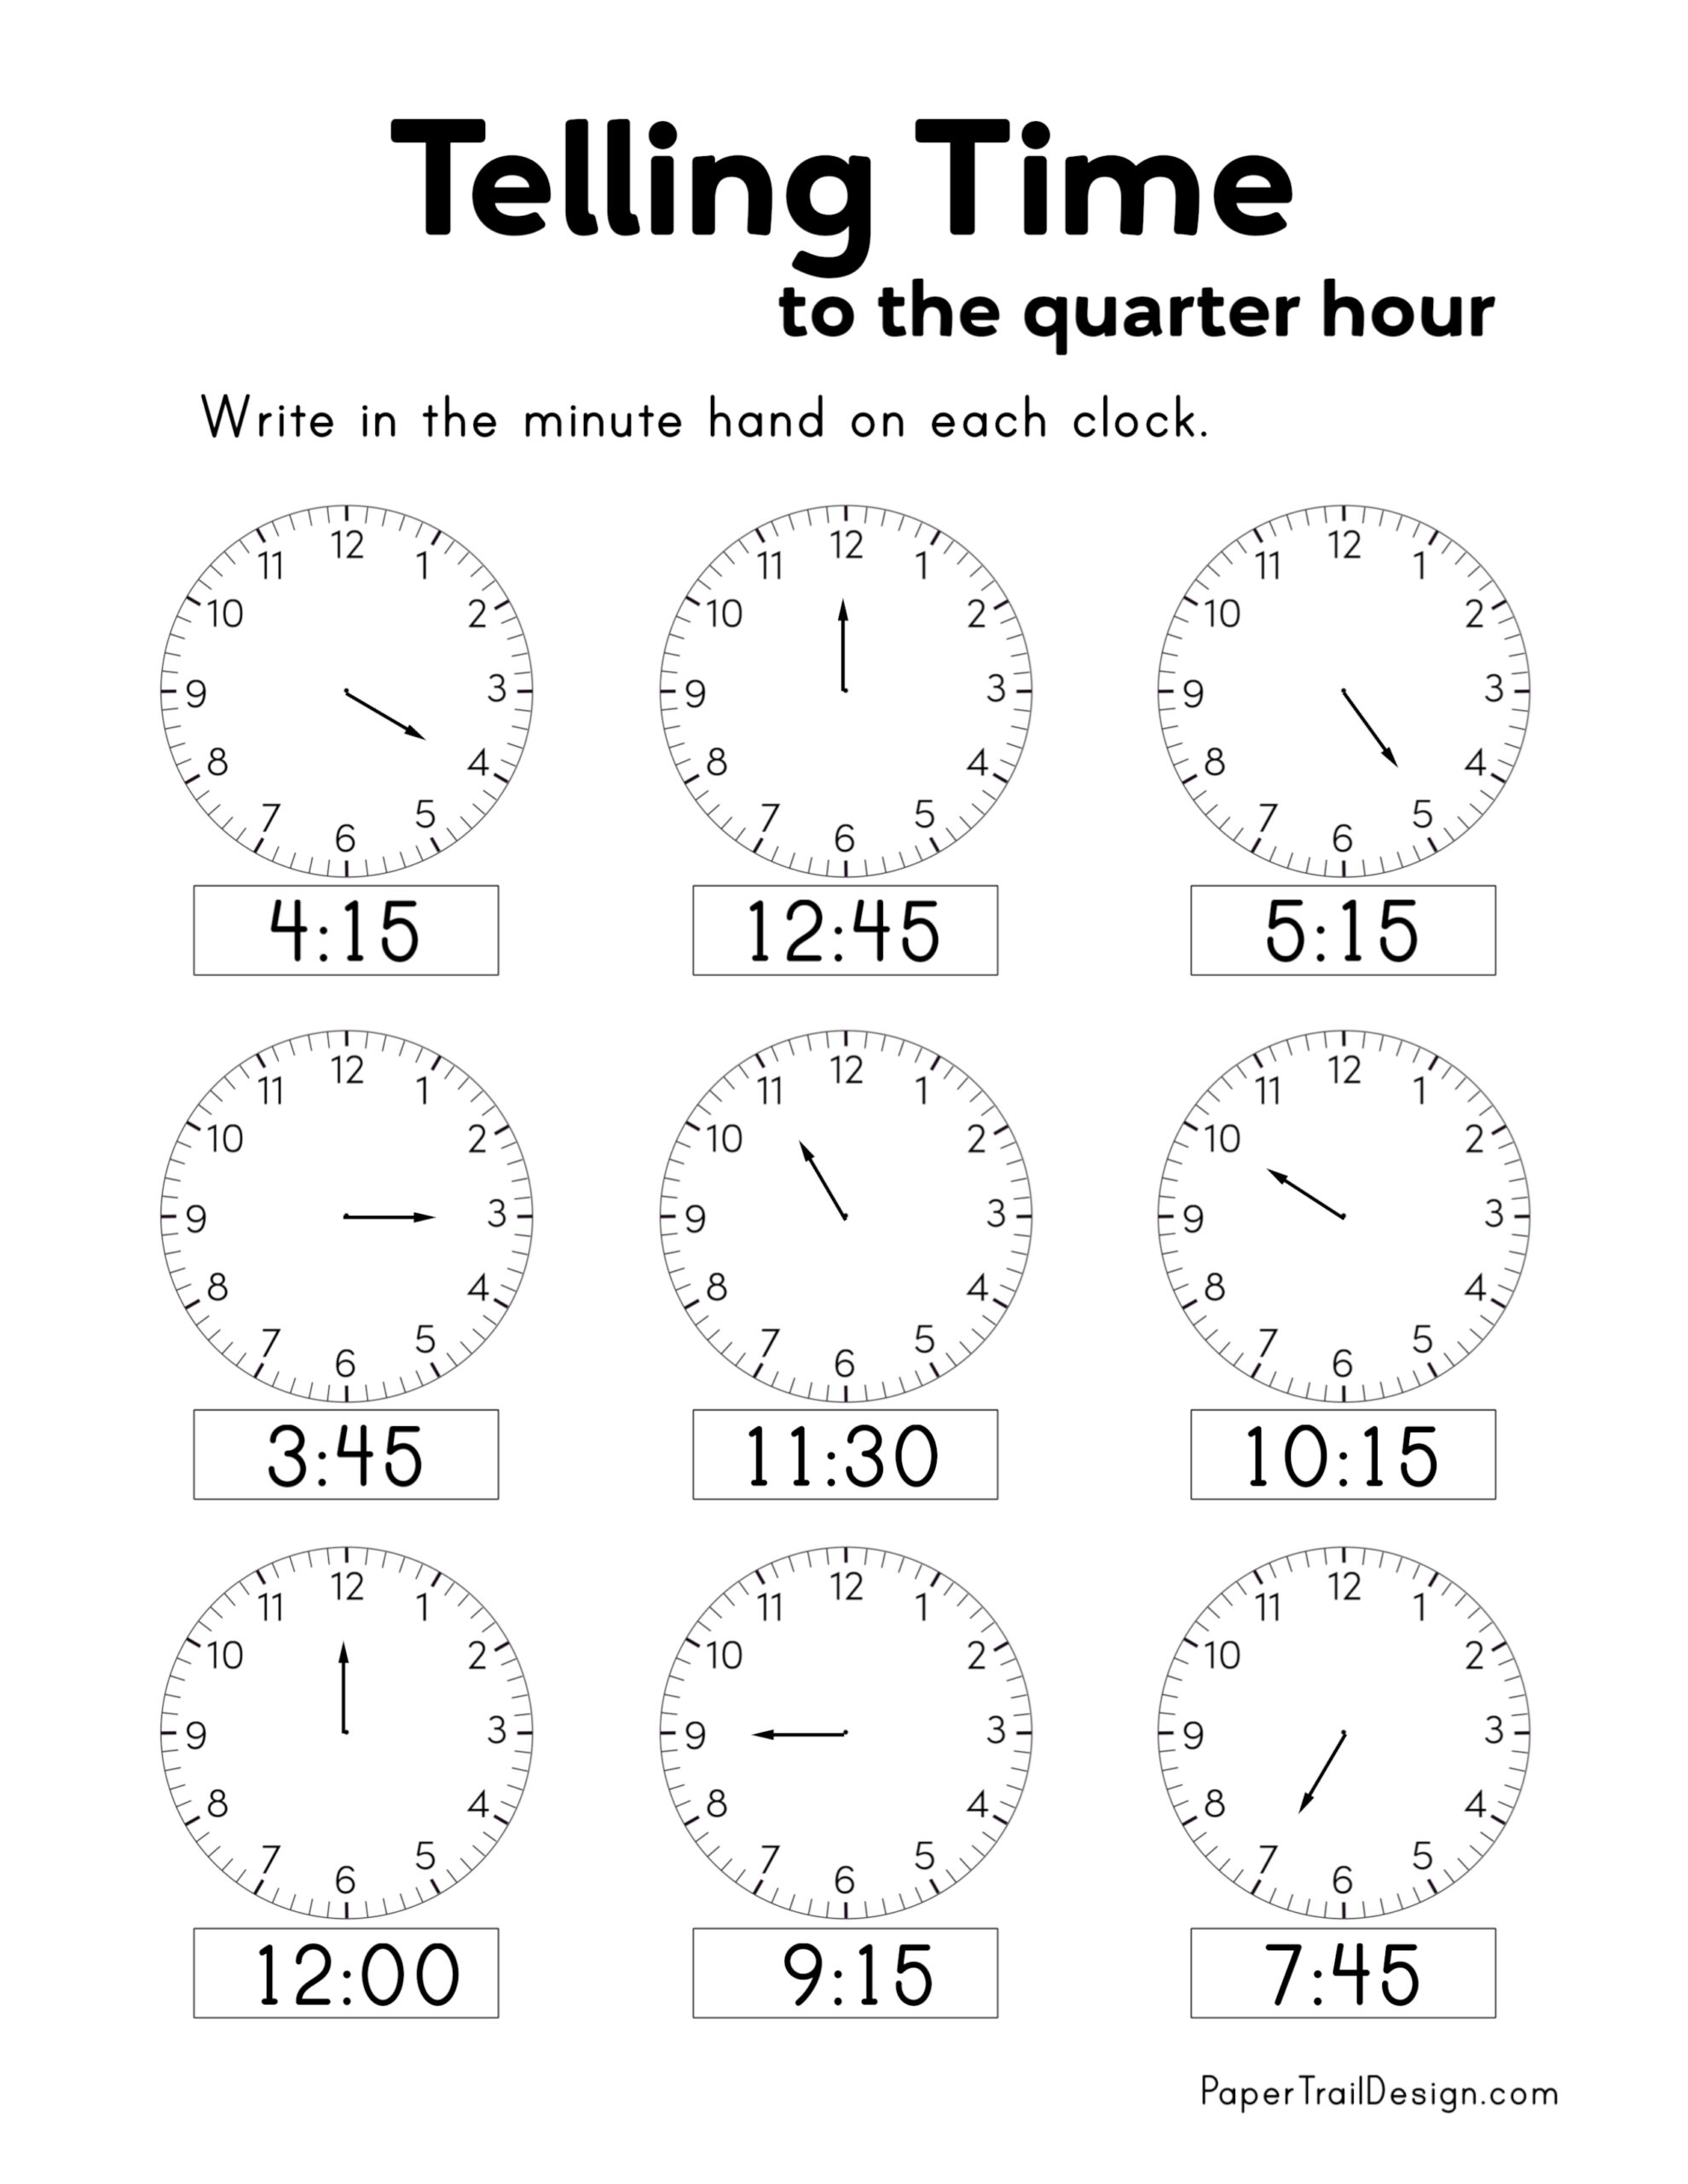 the-reading-time-on-12-hour-analog-clocks-in-5-minute-intervals-a